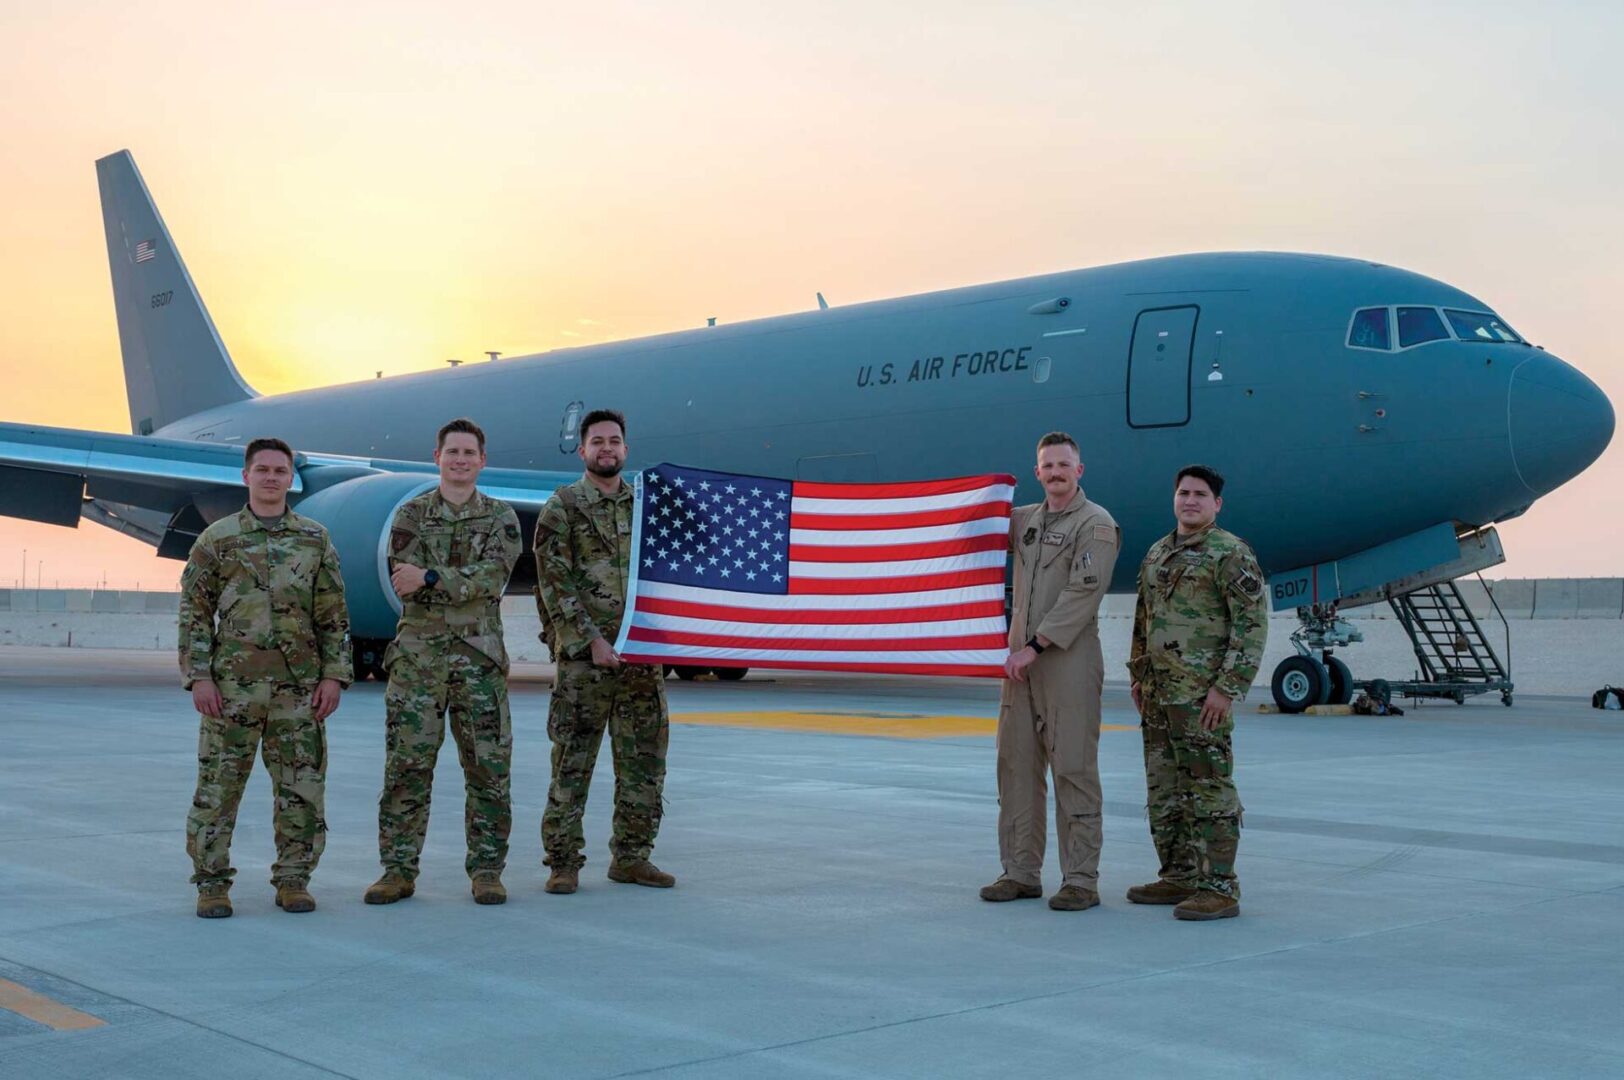 The aircrew from the KC-46A Pegasus’ first combat sortie pose for a group photo Aug. 29, 2022, during Air Mobility Command’s Employment Concept Exercise 22-08 at Al Udeid Air Base, Qatar. The Pegasus and aircrew participated in the exercise to provide air refueling operations to the U.S. Central Command theater. The team refueled two F-15E Strike Eagles assigned to the 335th Expeditionary Fighter Squadron. USAF photo by A1C Brenden Beezley